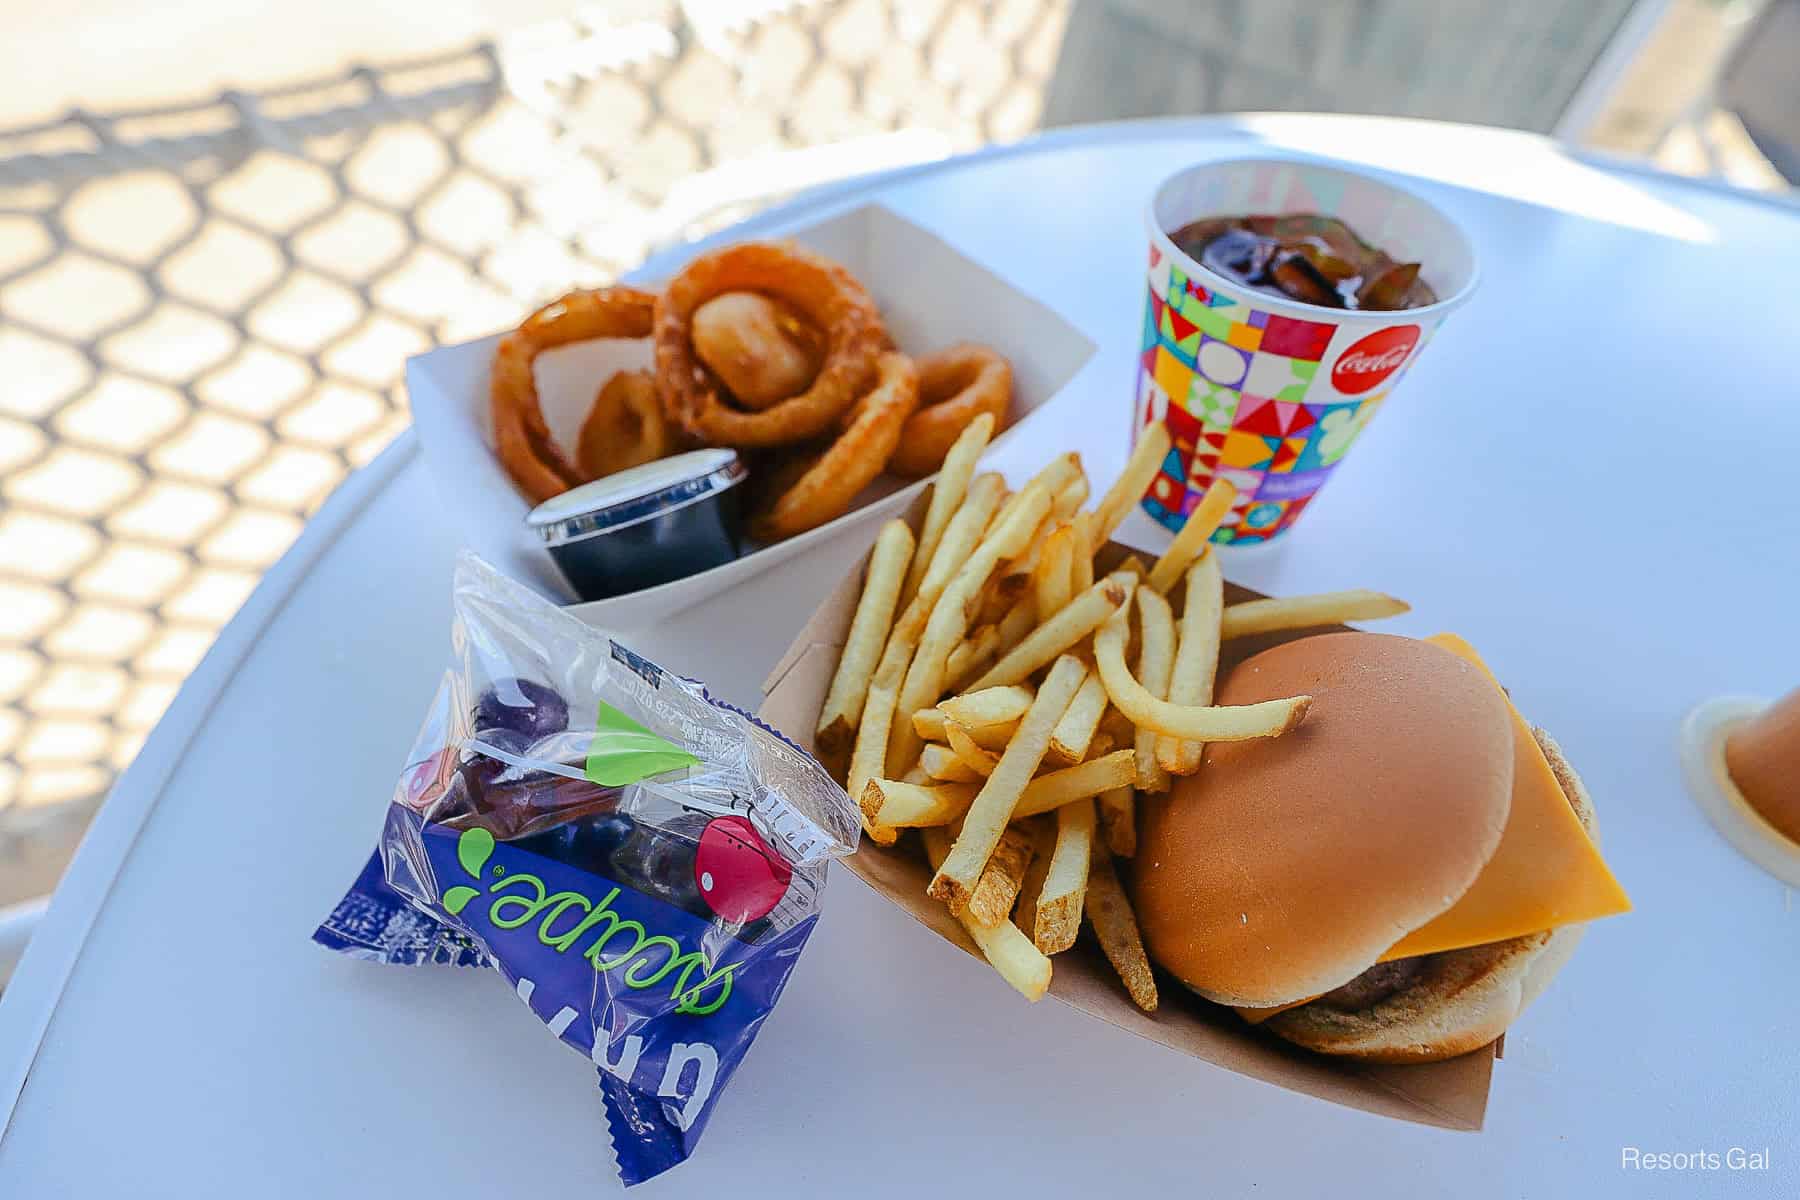 a kids' cheeseburger meal from Hurricane Hanna's 